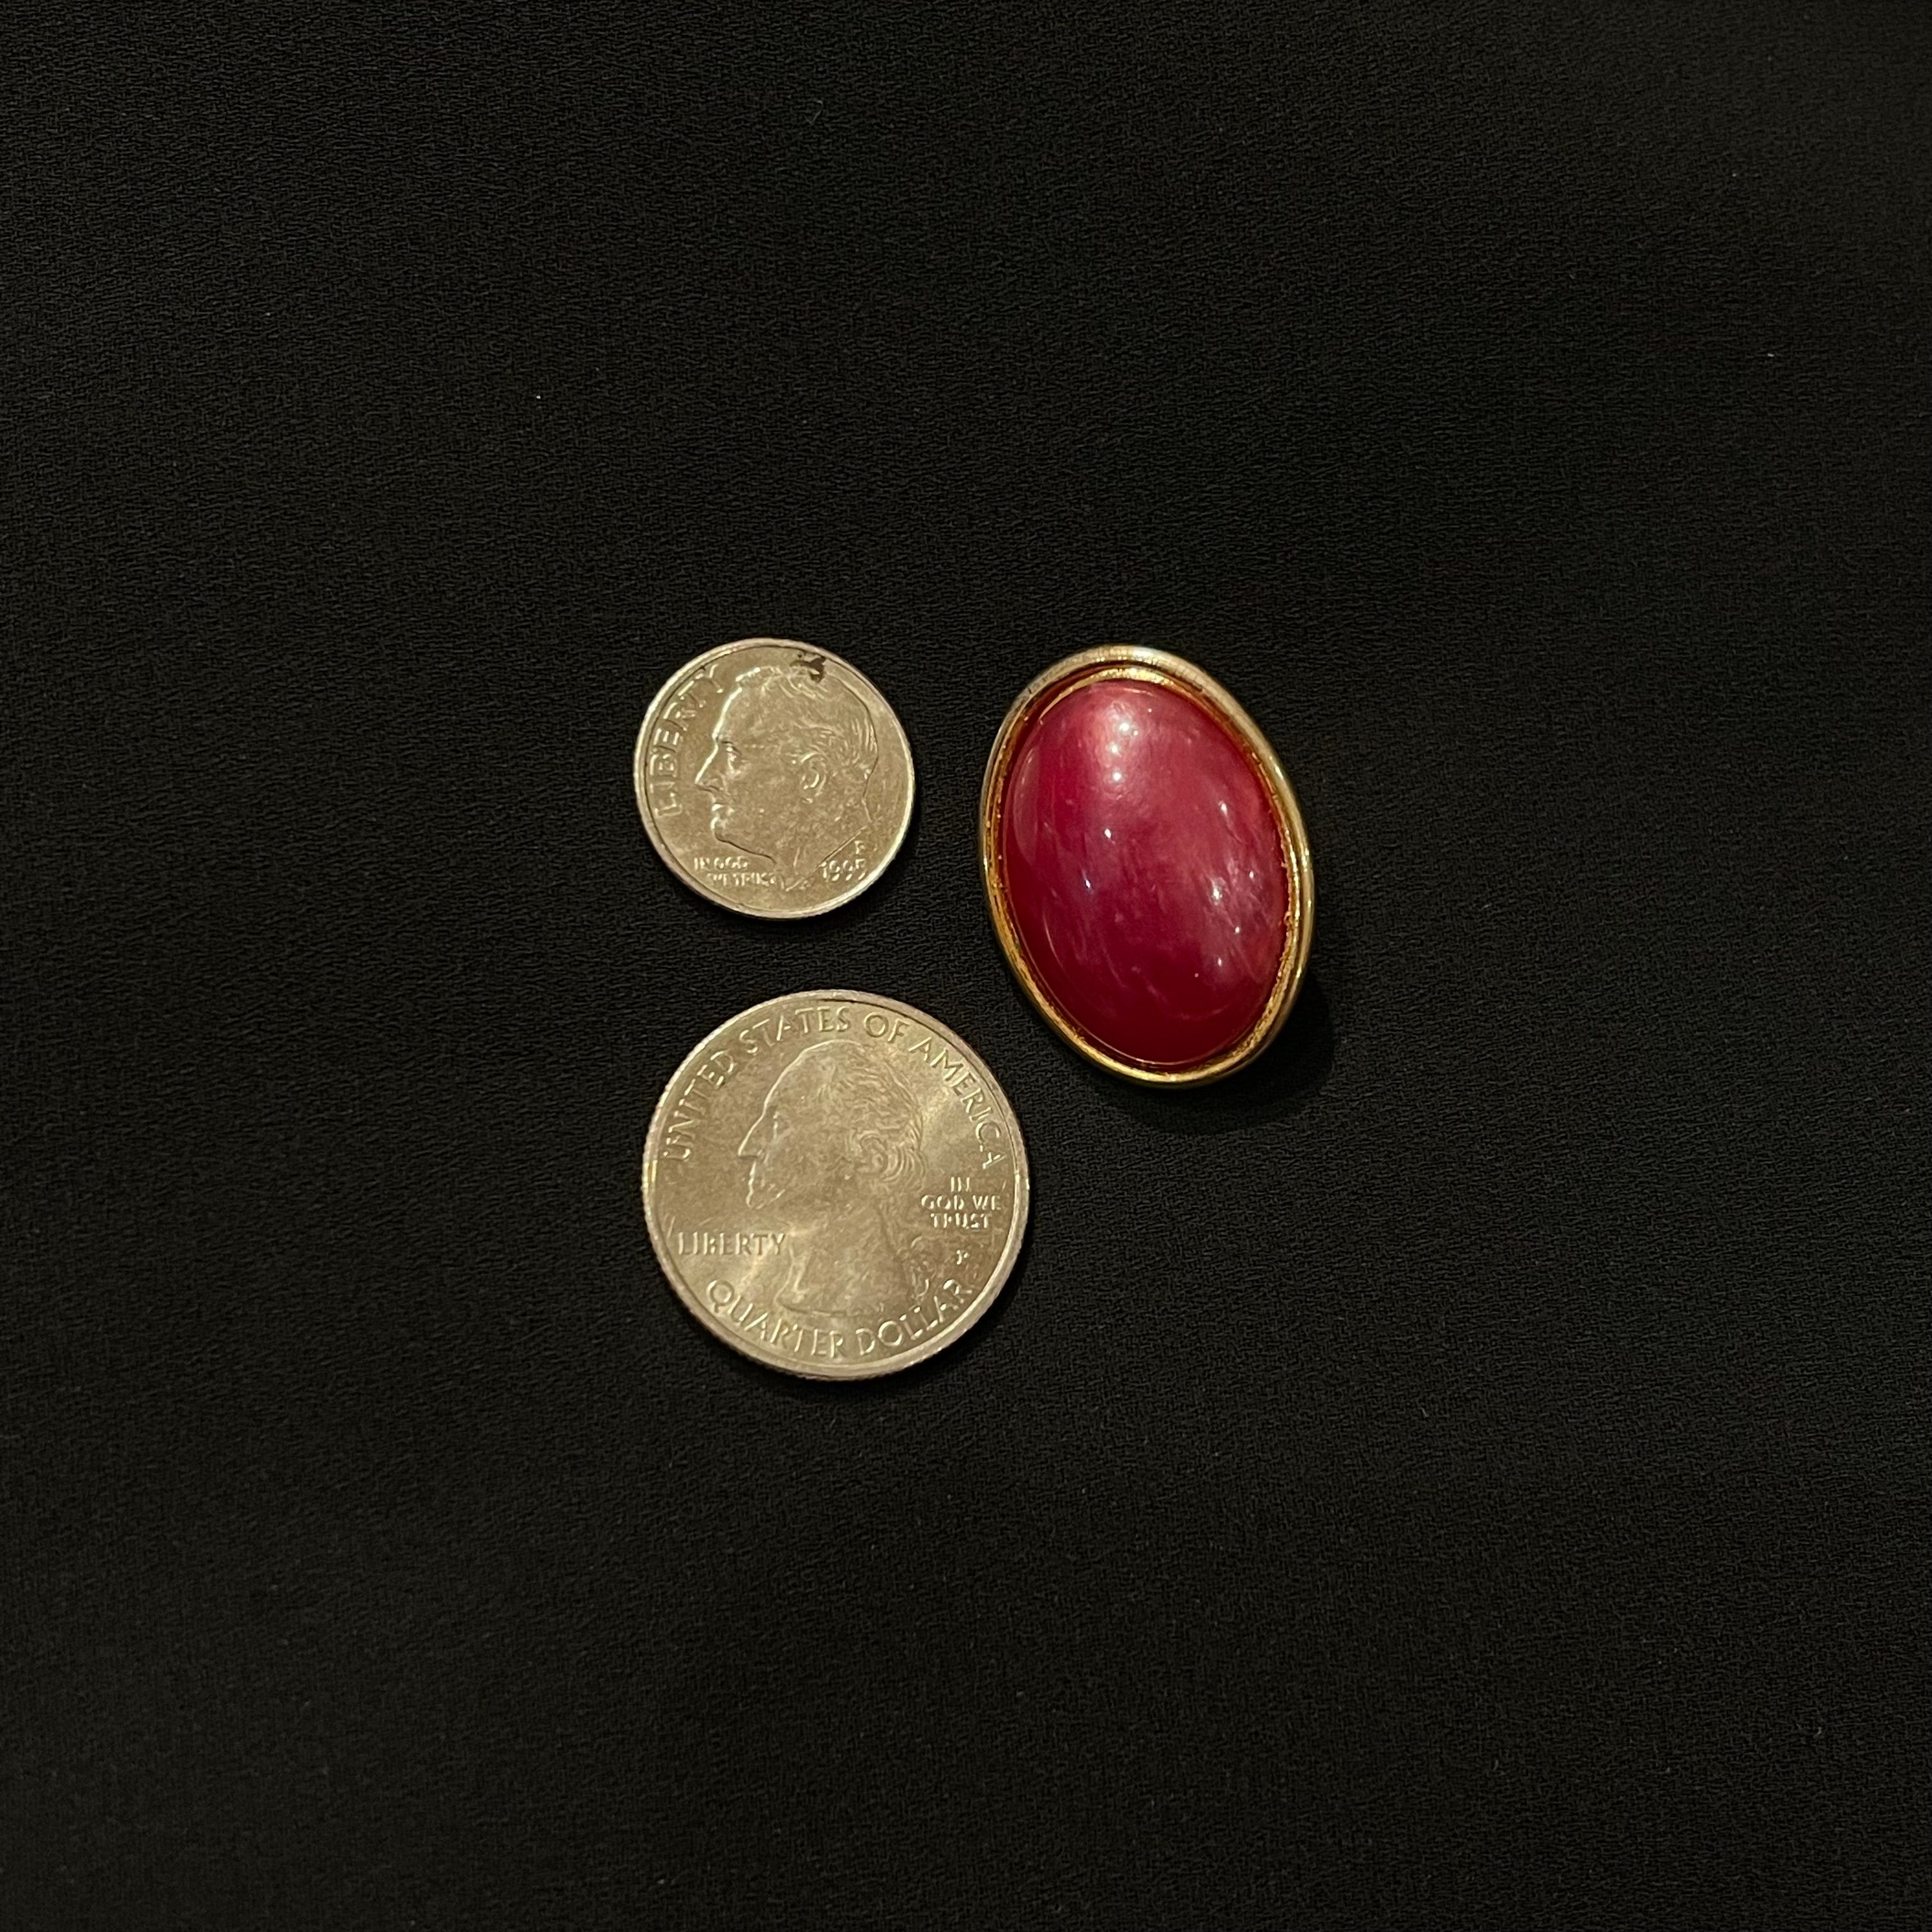 Vintage Gold and Magenta Oval Earrings